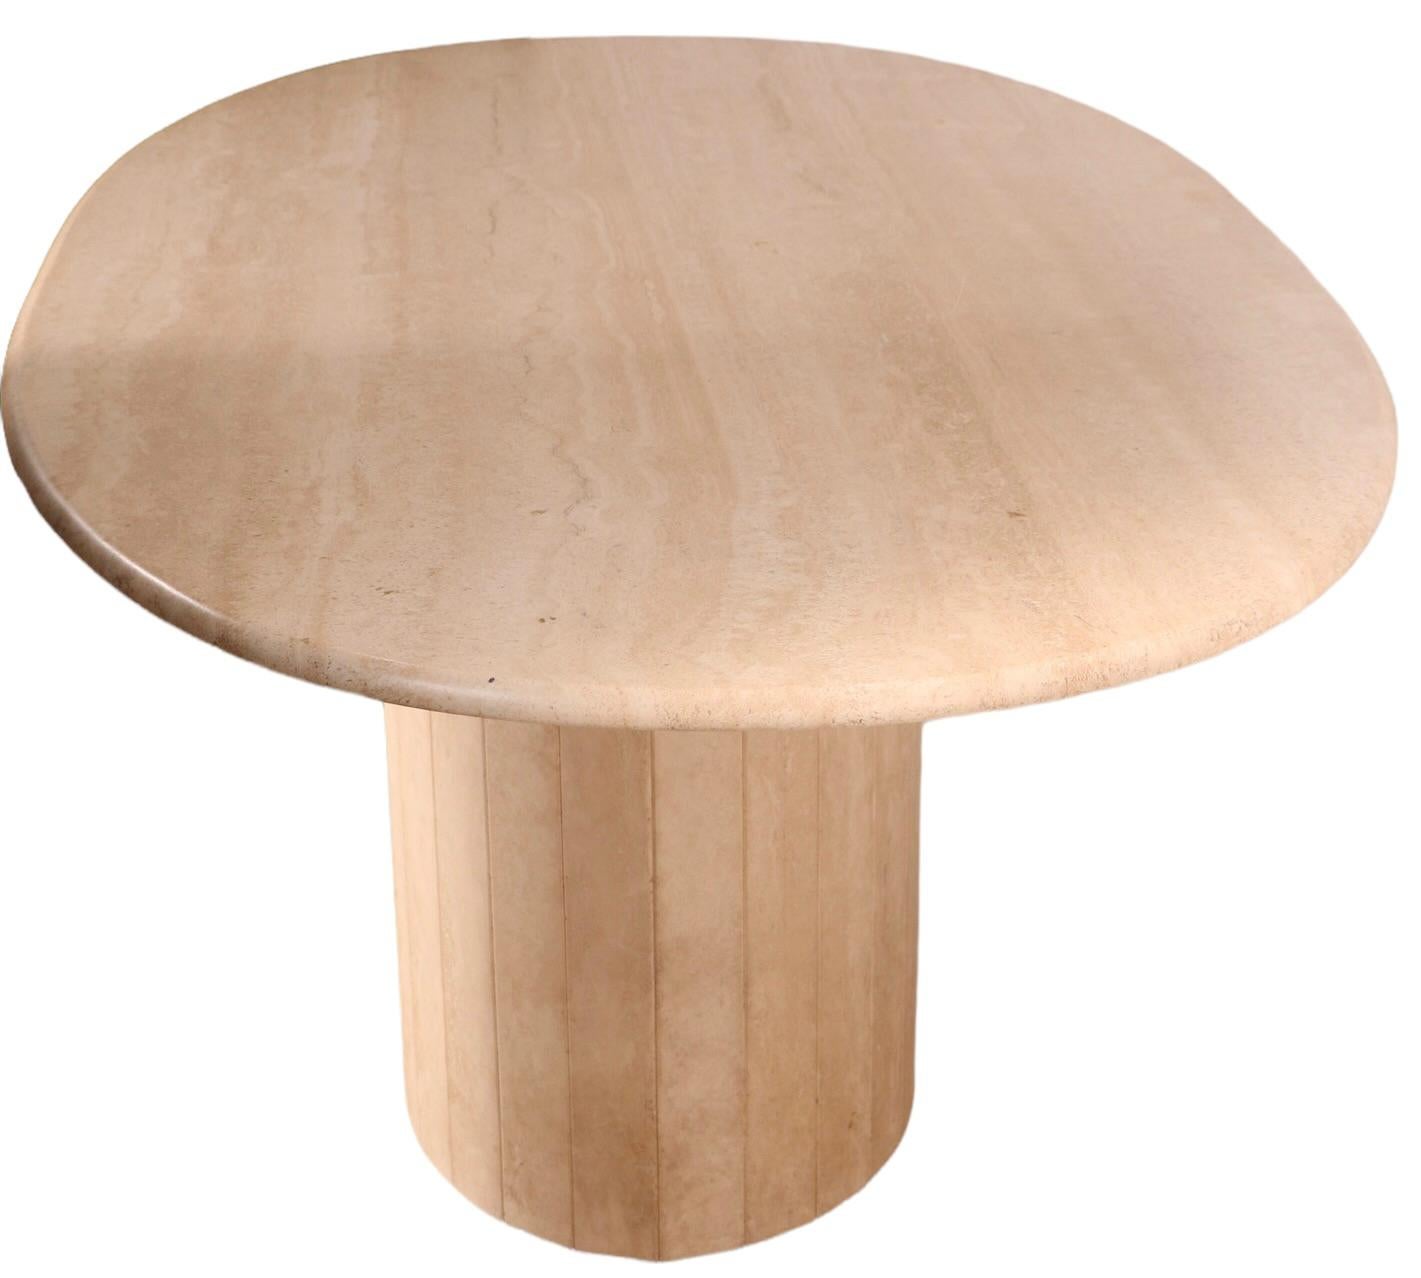 Oval Pedestal Base Travertine Marble Dining Table Made in Italy ca. 1970-1980’s 1